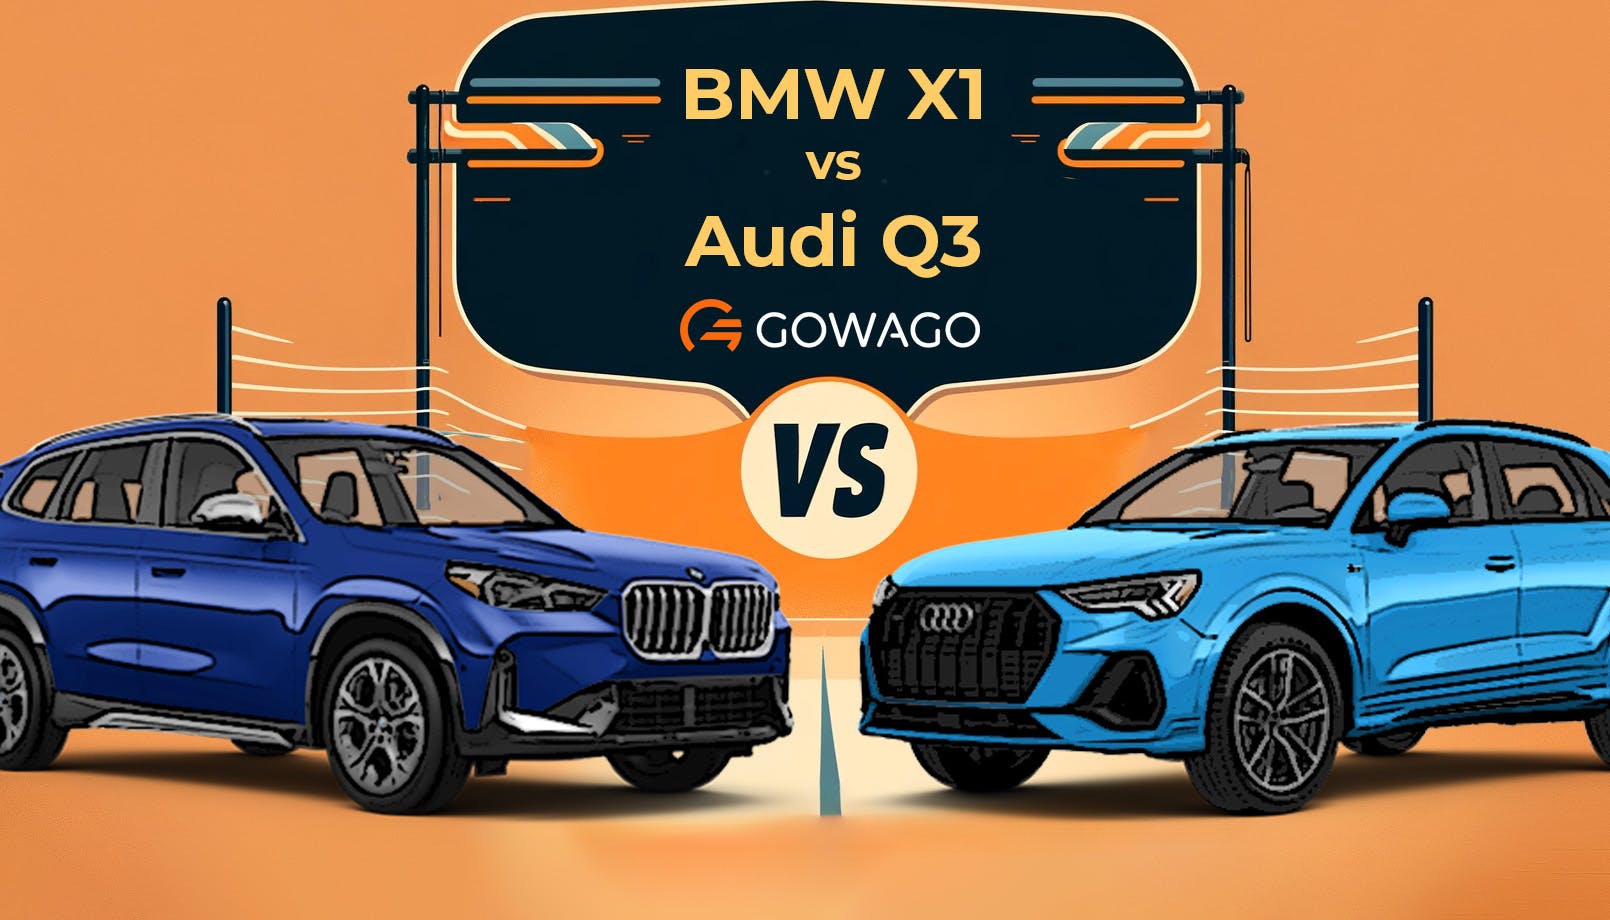 blog item card - BMW X1 vs Audi Q3: Discover the differences in performance, practicality, and design between these premium SUVs and make the right choice for your next lease!